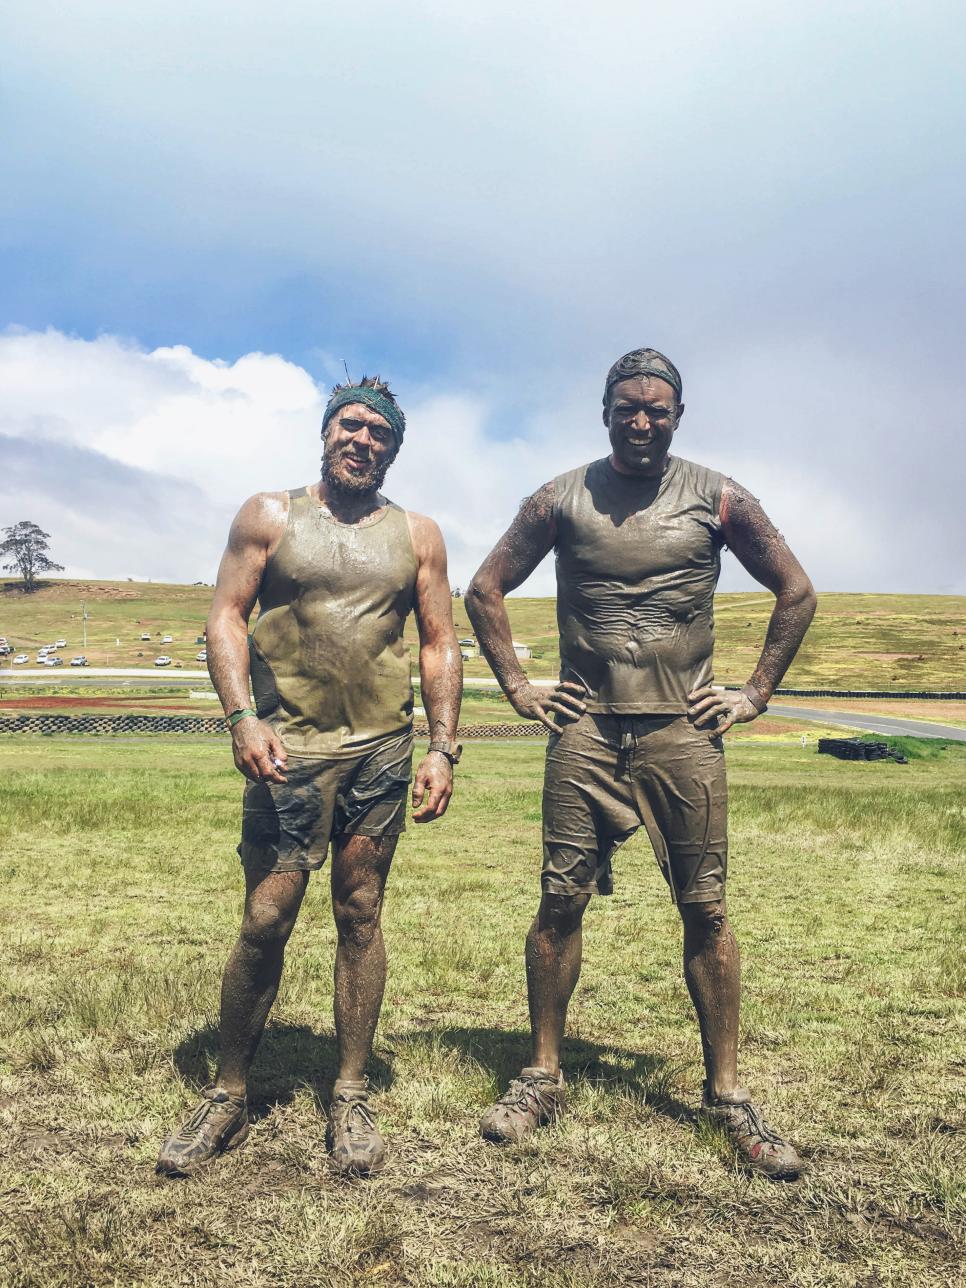 Two happy men standing together after completing a mud run challenge